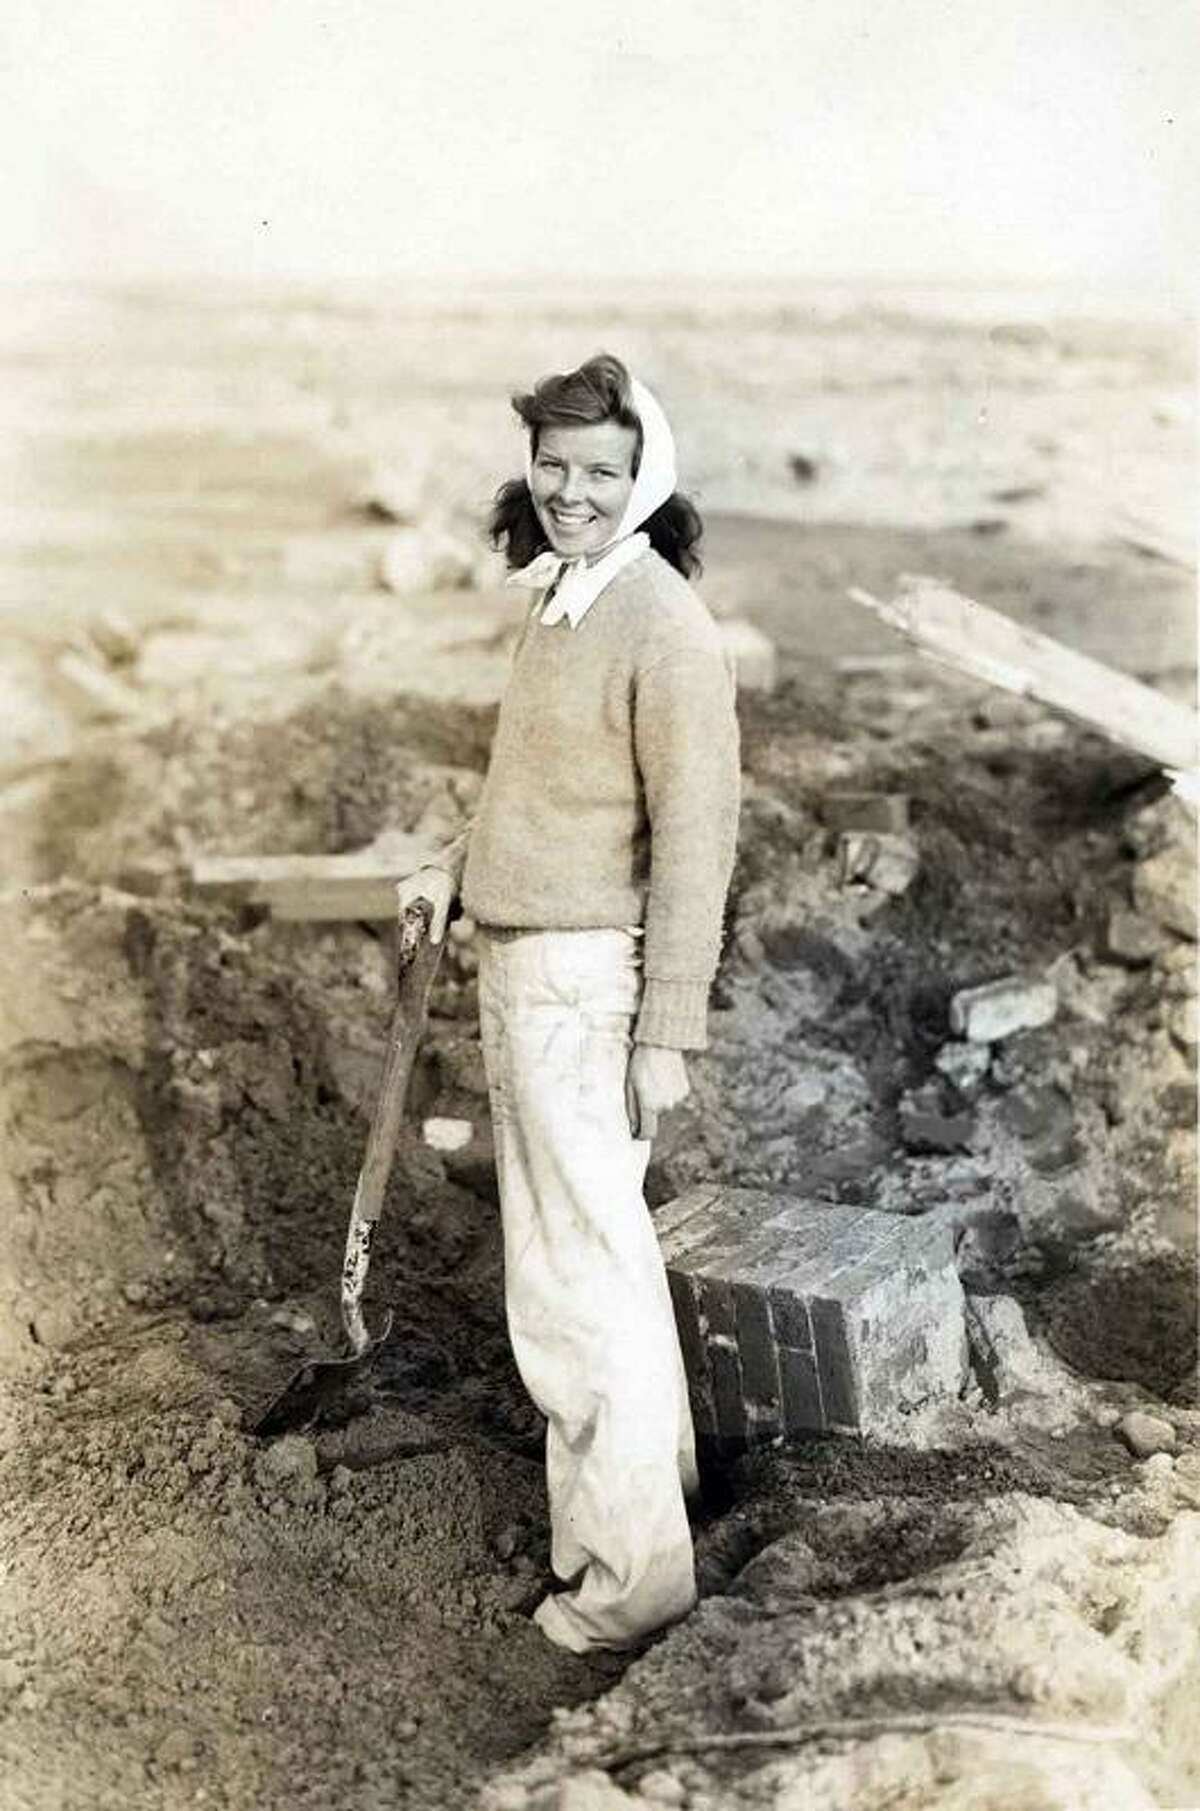 Kate Hepburn during the building of her home in Old Saybrook after her previous home was destroyed in the hurricane of 1938.